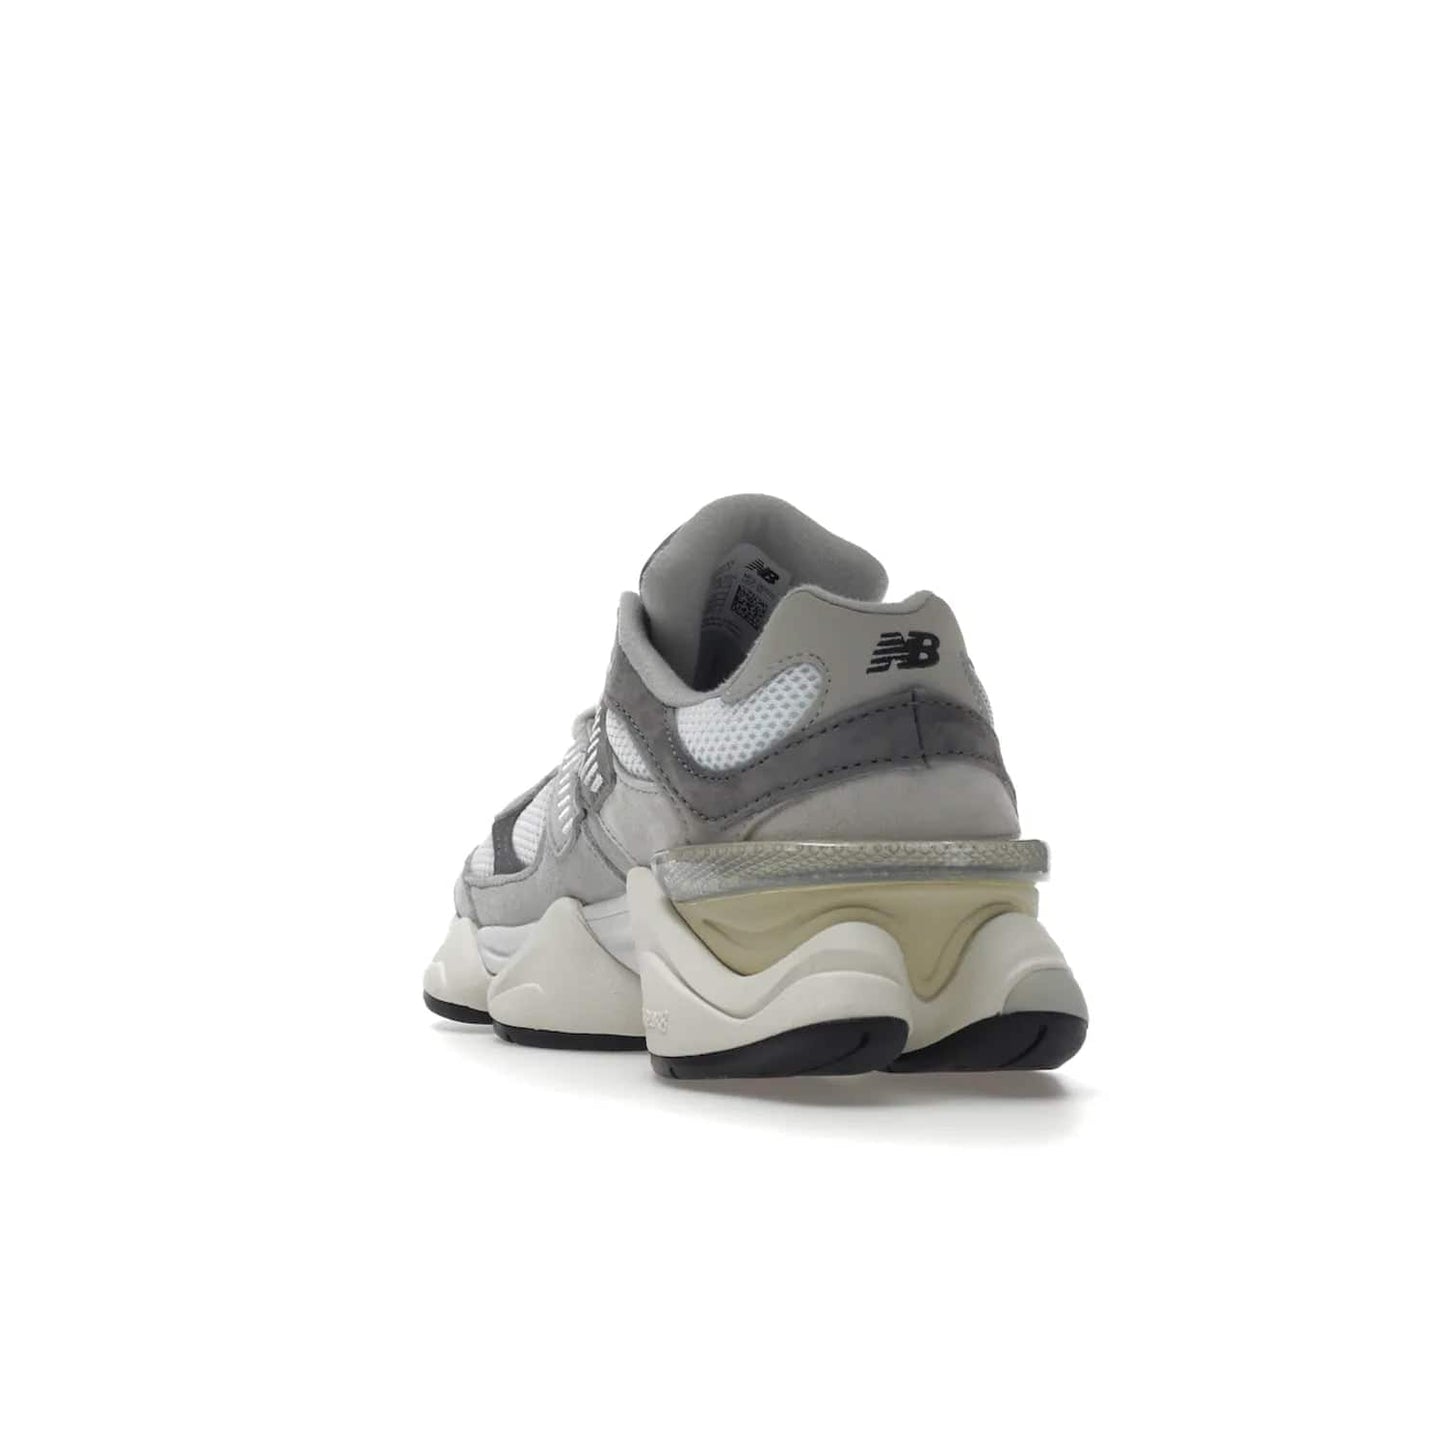 New Balance 9060 Rain Cloud Grey - Image 26 - Only at www.BallersClubKickz.com - New Balance 9060 Rain Cloud Grey is an early 2000s design with grey and off-white tones. Pigskin suede, mesh, and silver accents. "N" emblem and dual-density midsole on diamond outsole. ABZORB technology cushioning. September 2nd release for $150.